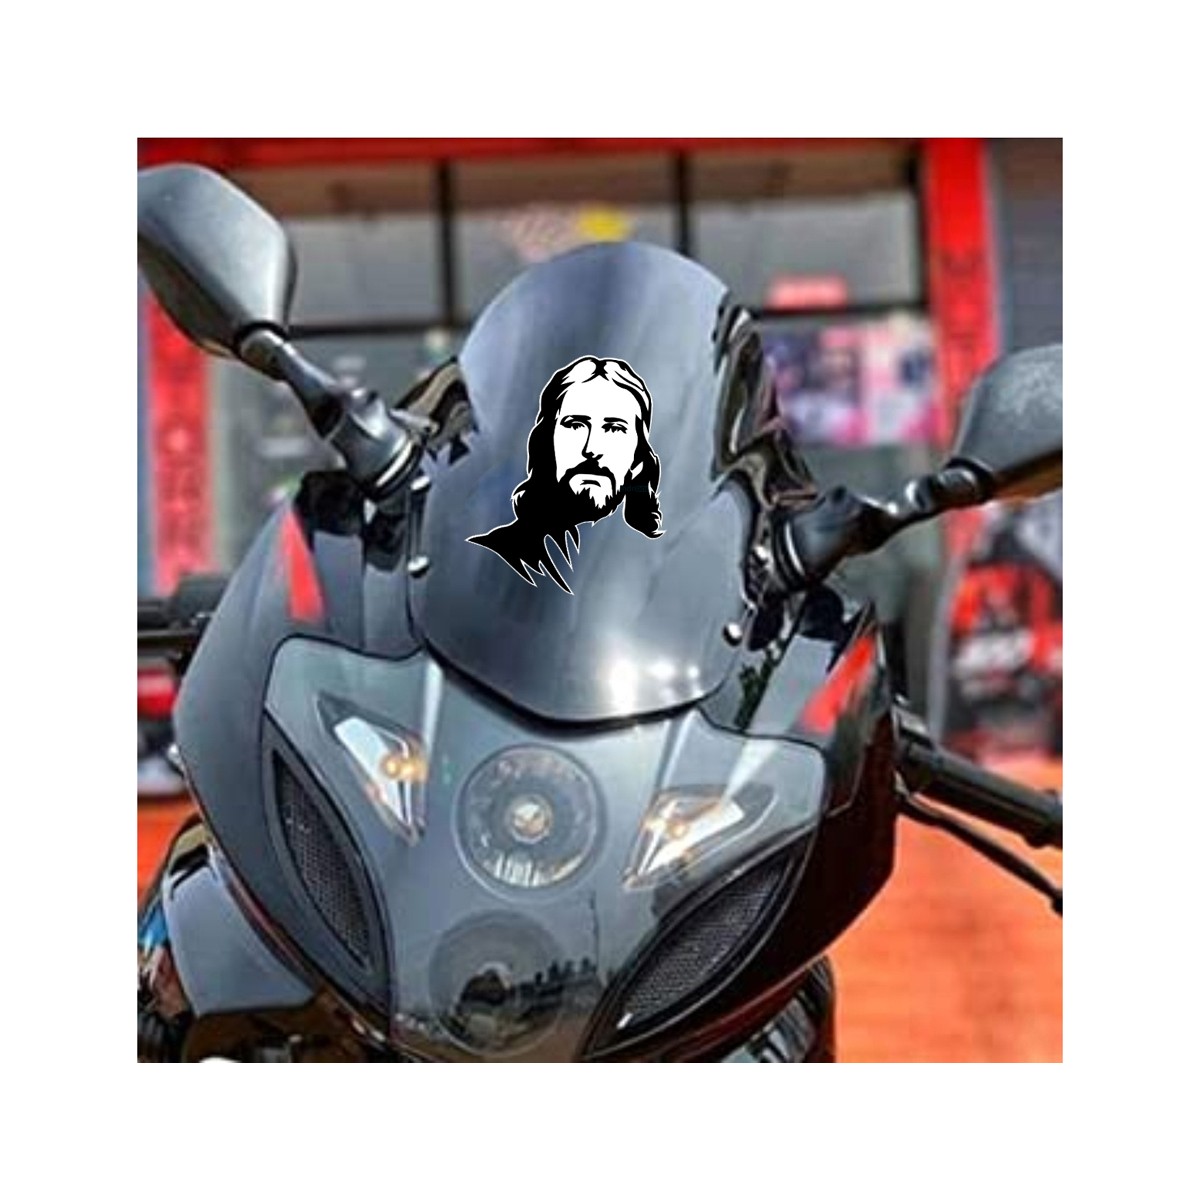 indnone® Lord Jesus Face Logo Sticker for Bike Water Proof PVC Vinyl Decal Sticker | White & Black Color Standard Size